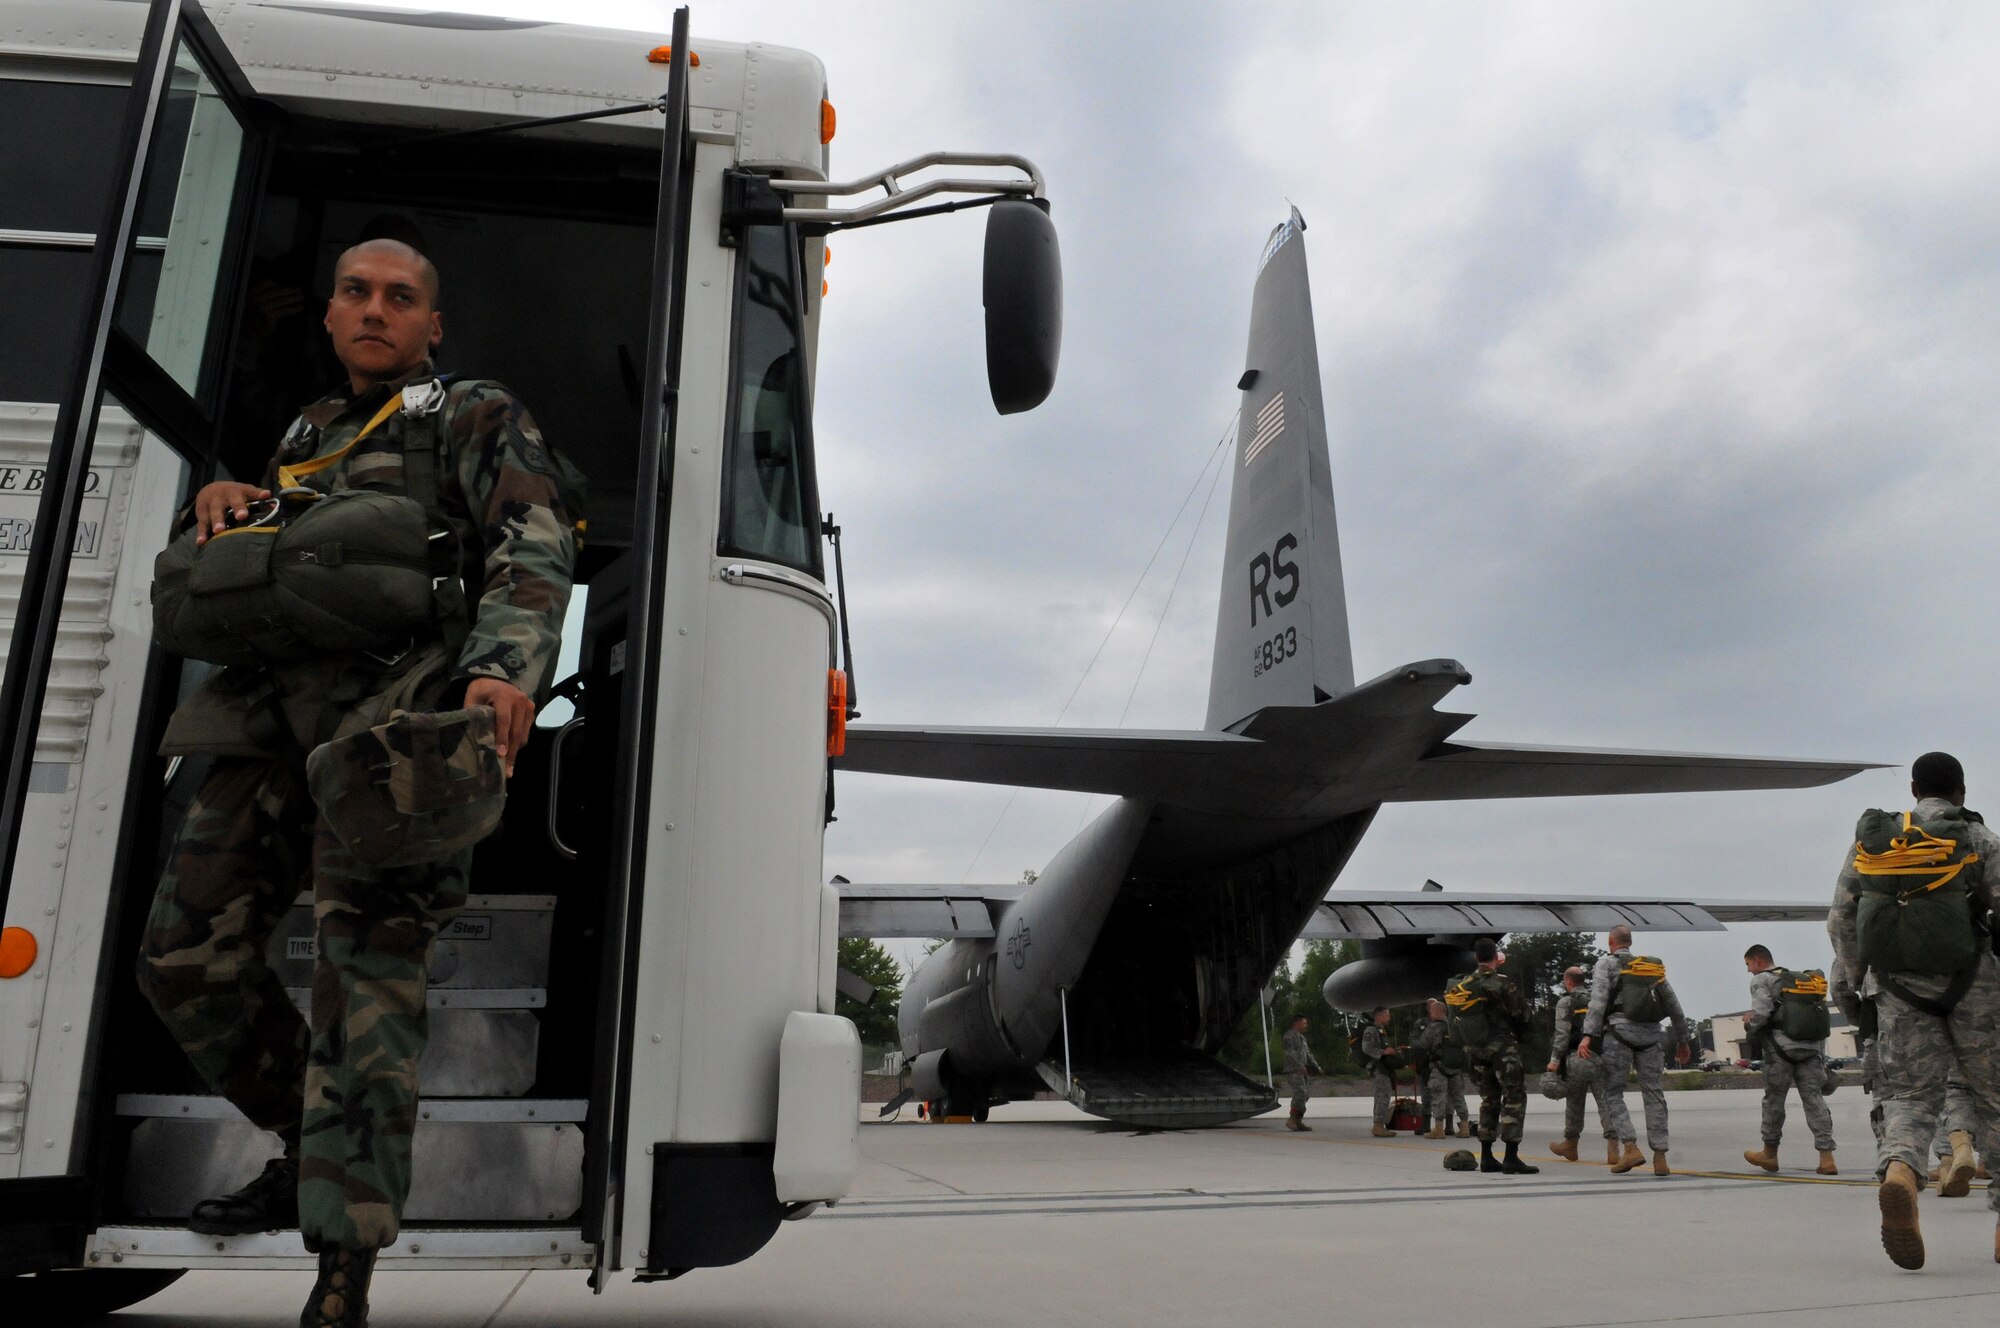 United States Air Force Staff Sgt. Gabriel Rodriguez, 786th Security Forces paratrooper, gets off the bus to board a C-130E Hercules on Ramstein Air Base, Germany, April 30, 2009. The jump was conducted as part of the celebration for the Contingency Readiness Group's 10th anniversary. (U.S. Air Force photo by Airman 1st Class Grovert Fuentes-Contreras)